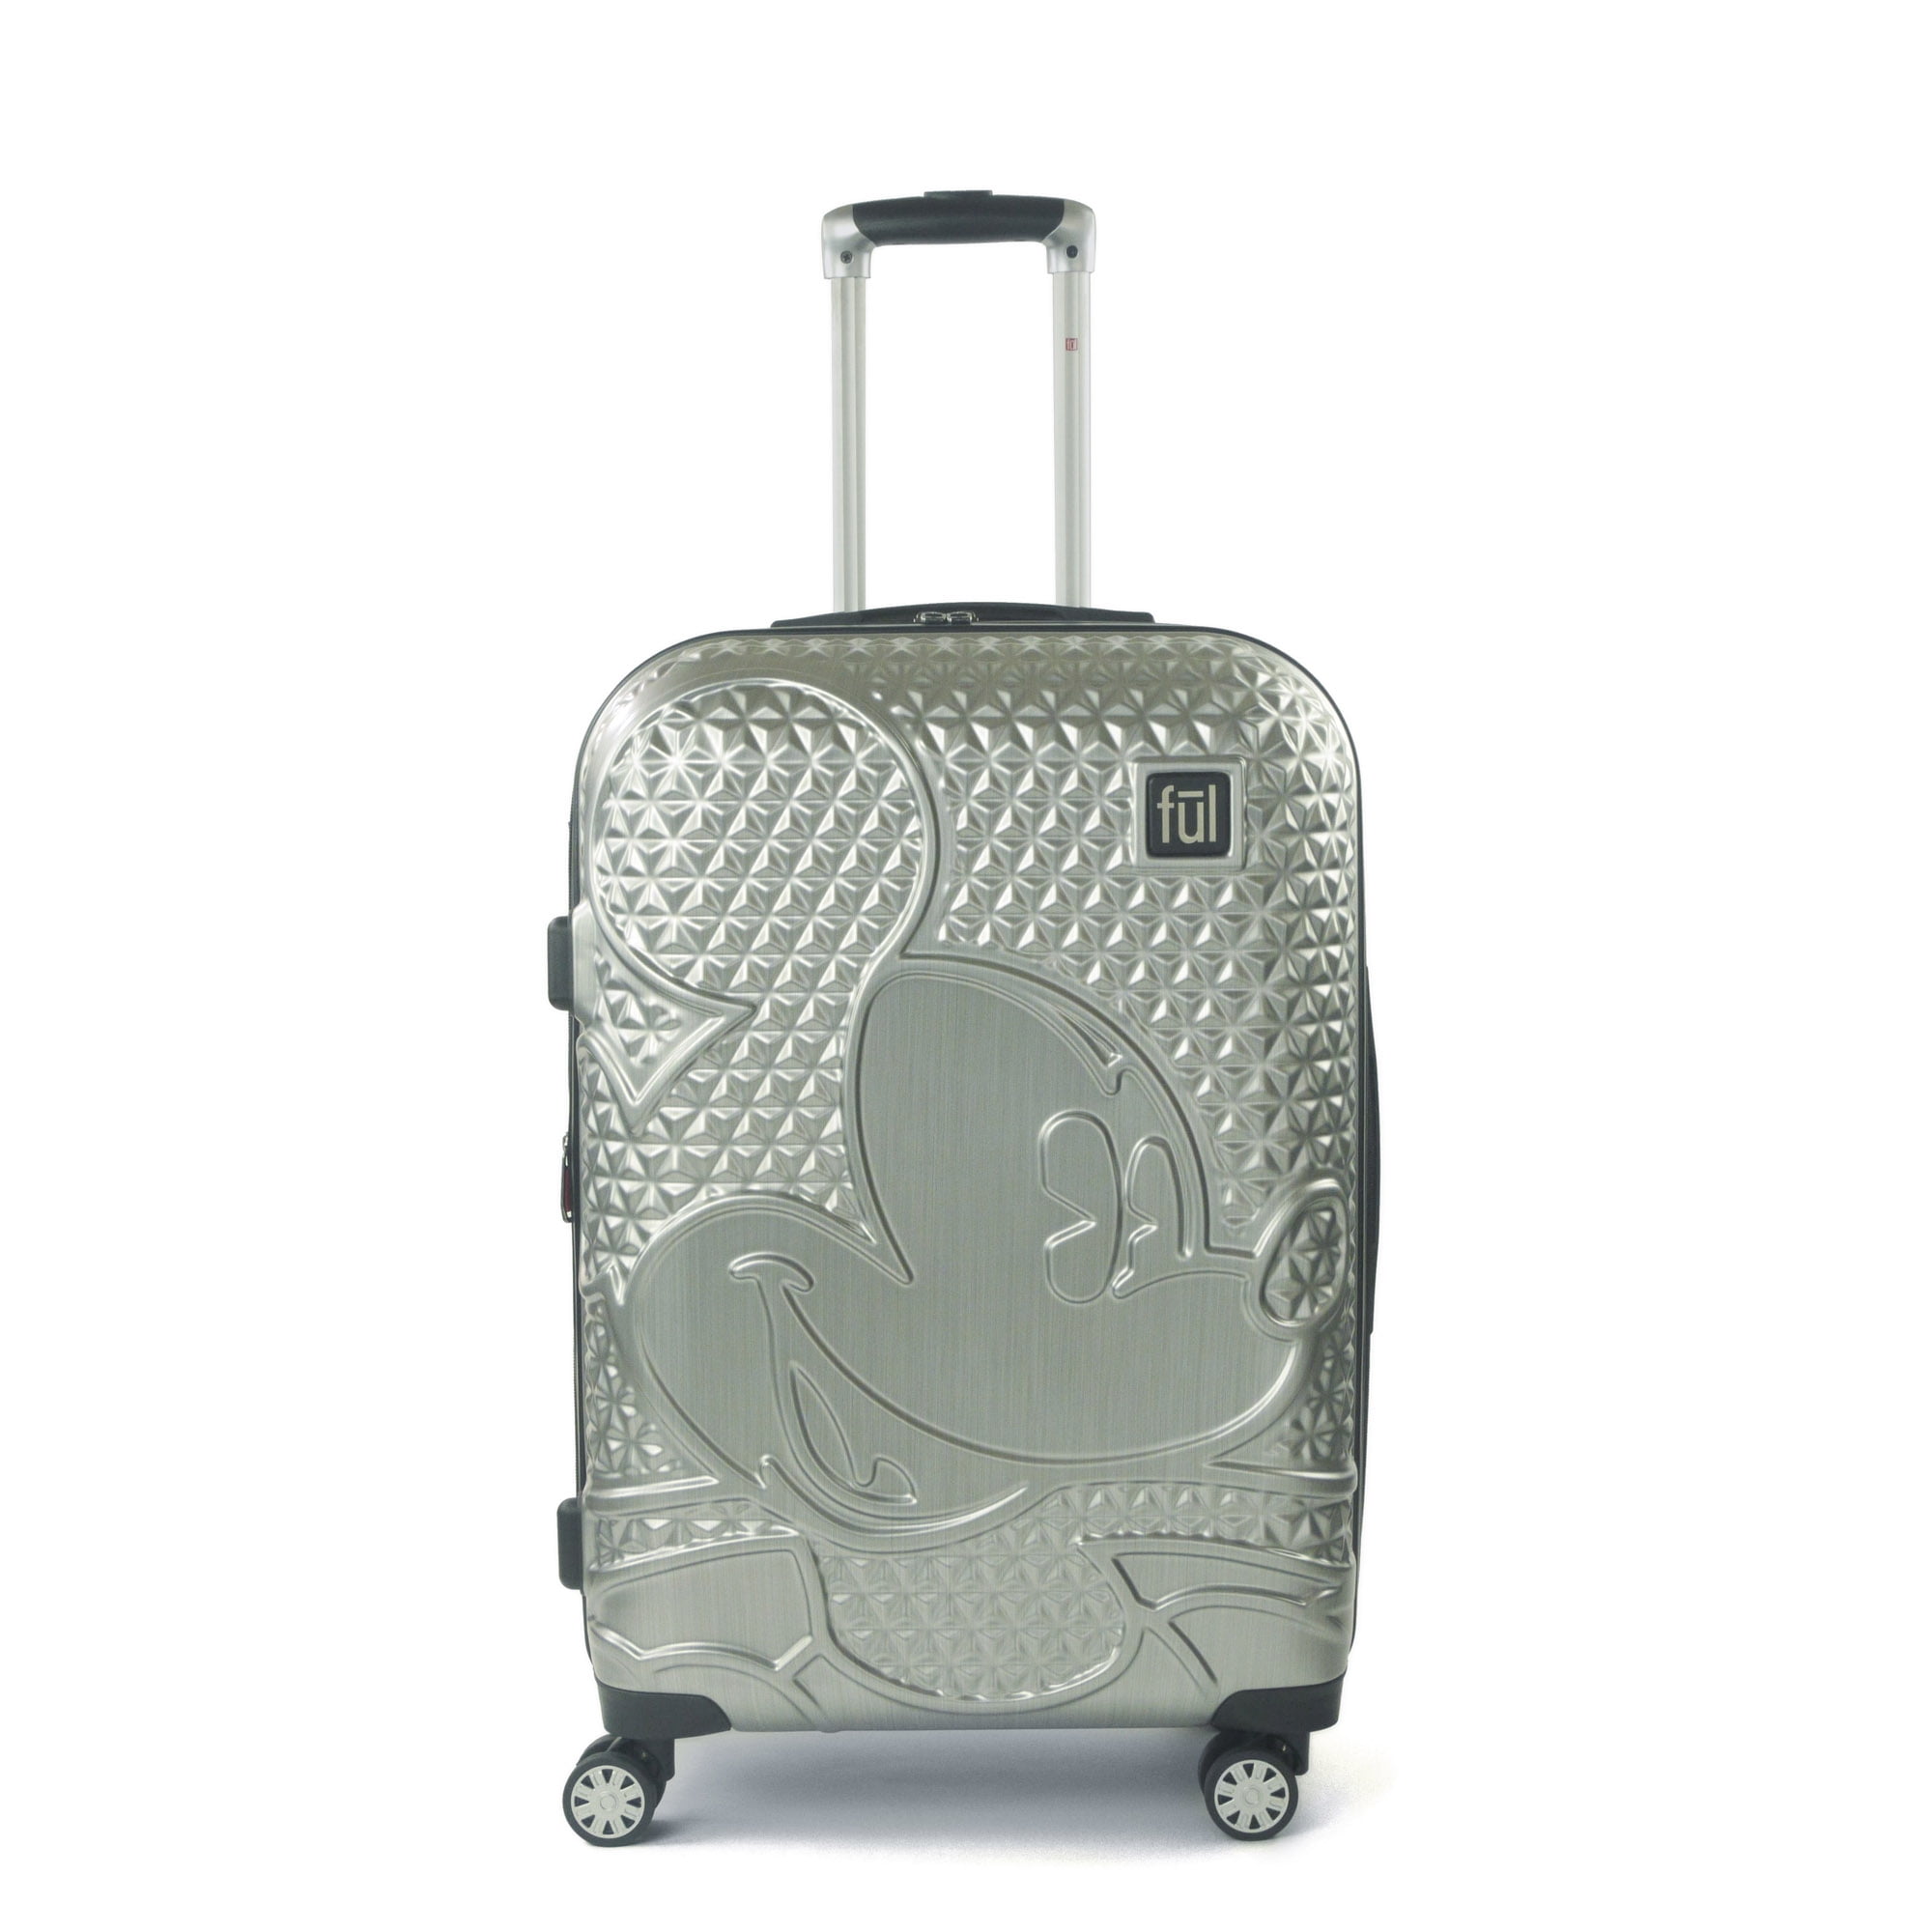 Textured 25in FUL Luggage, Mouse Sided Mickey Disney Silver Rolling Hard